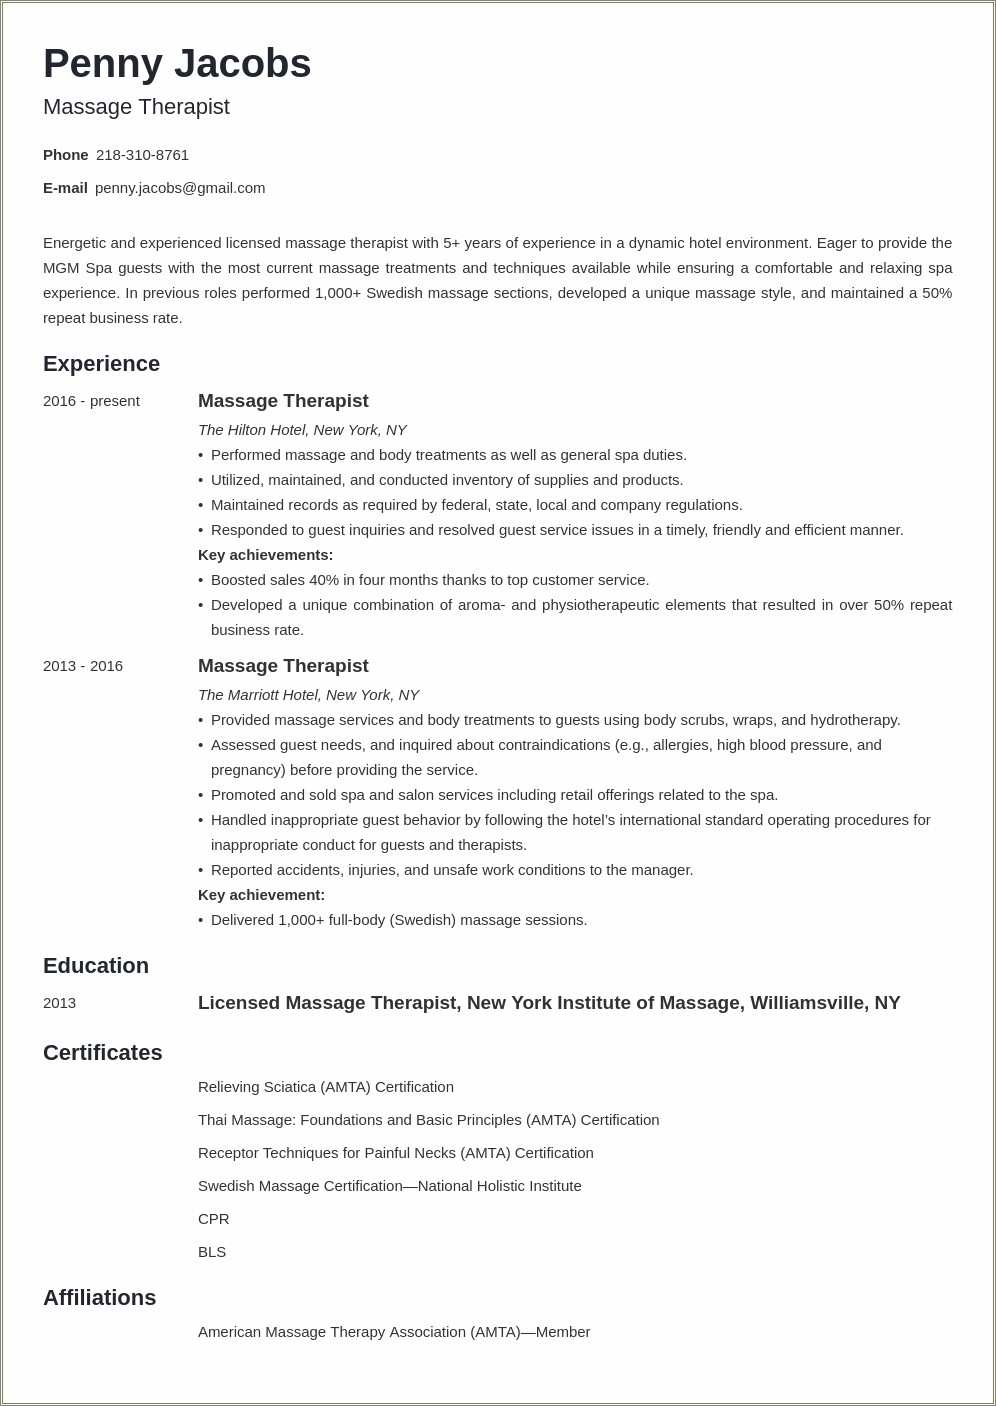 Best Way To Improve Resume For Spa